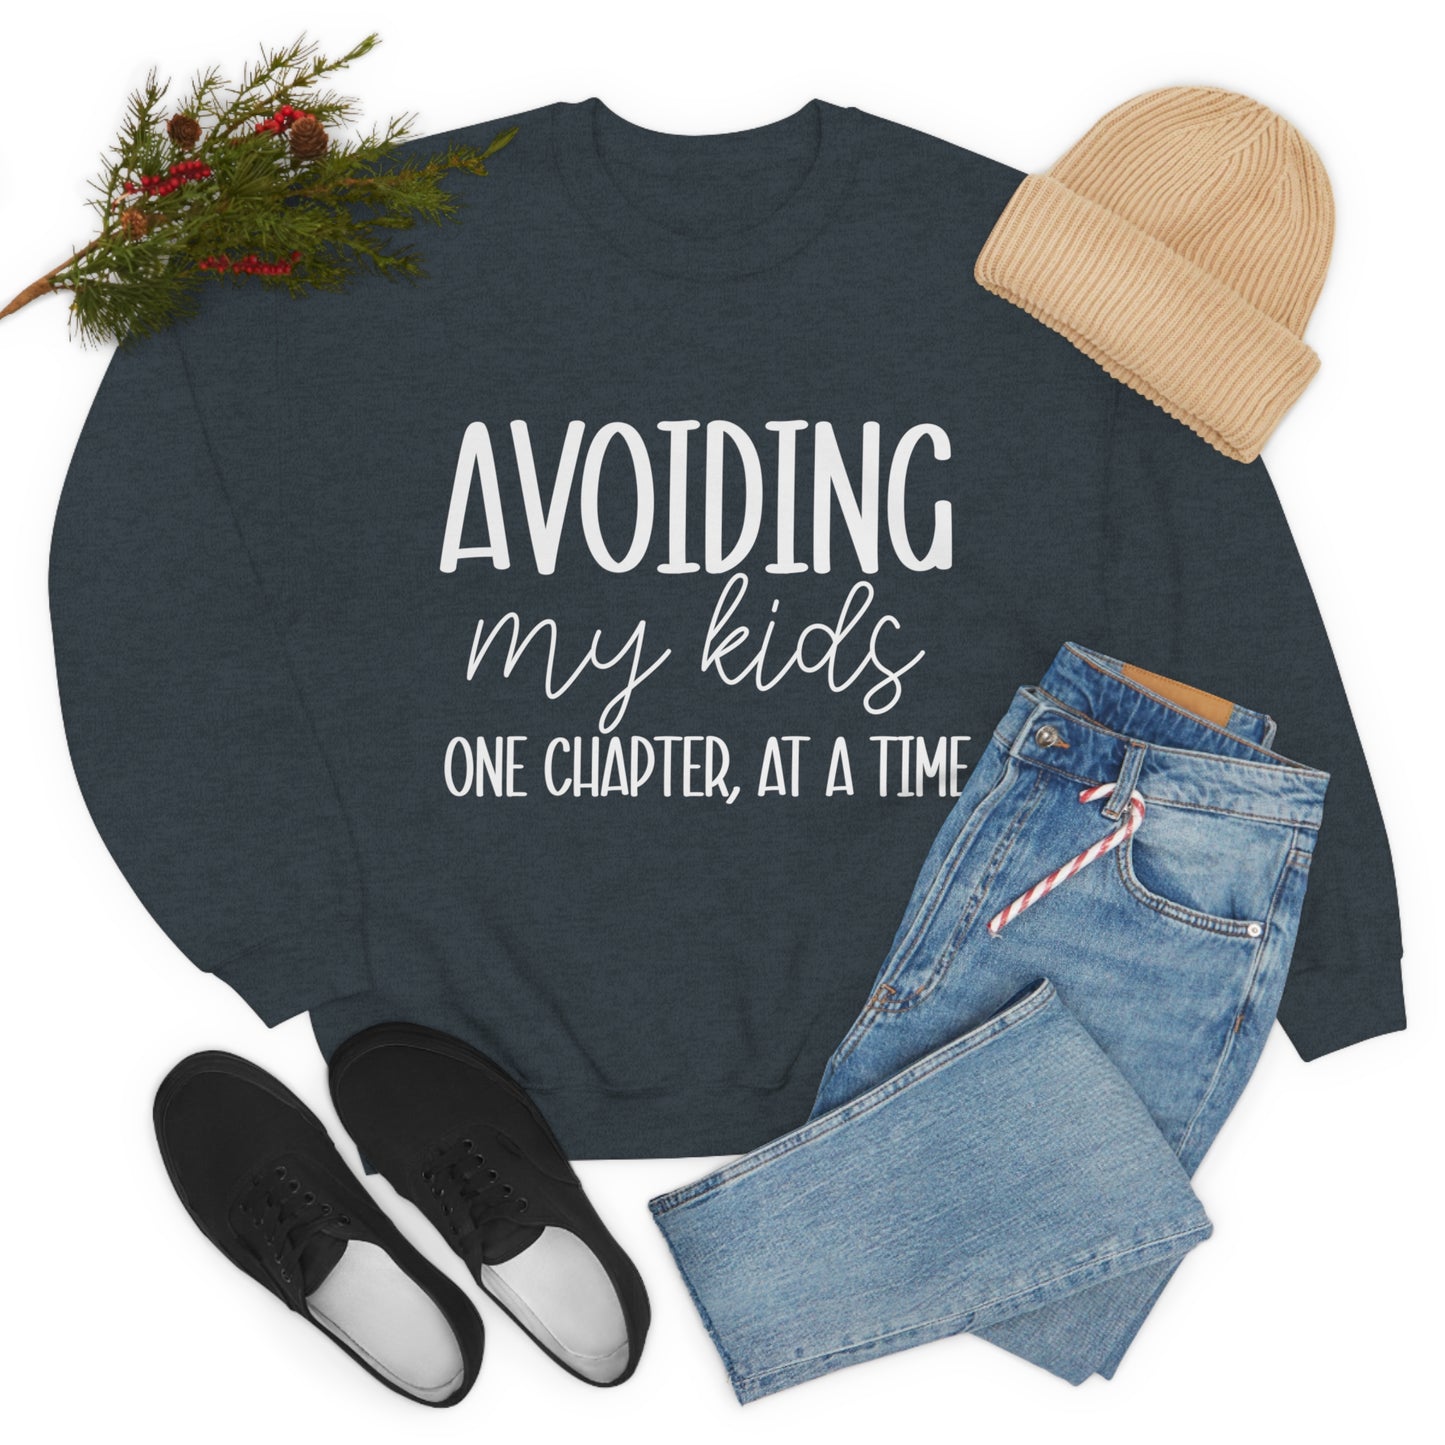 Avoiding My Kids One Chapter At A Time Crewneck Sweatshirt